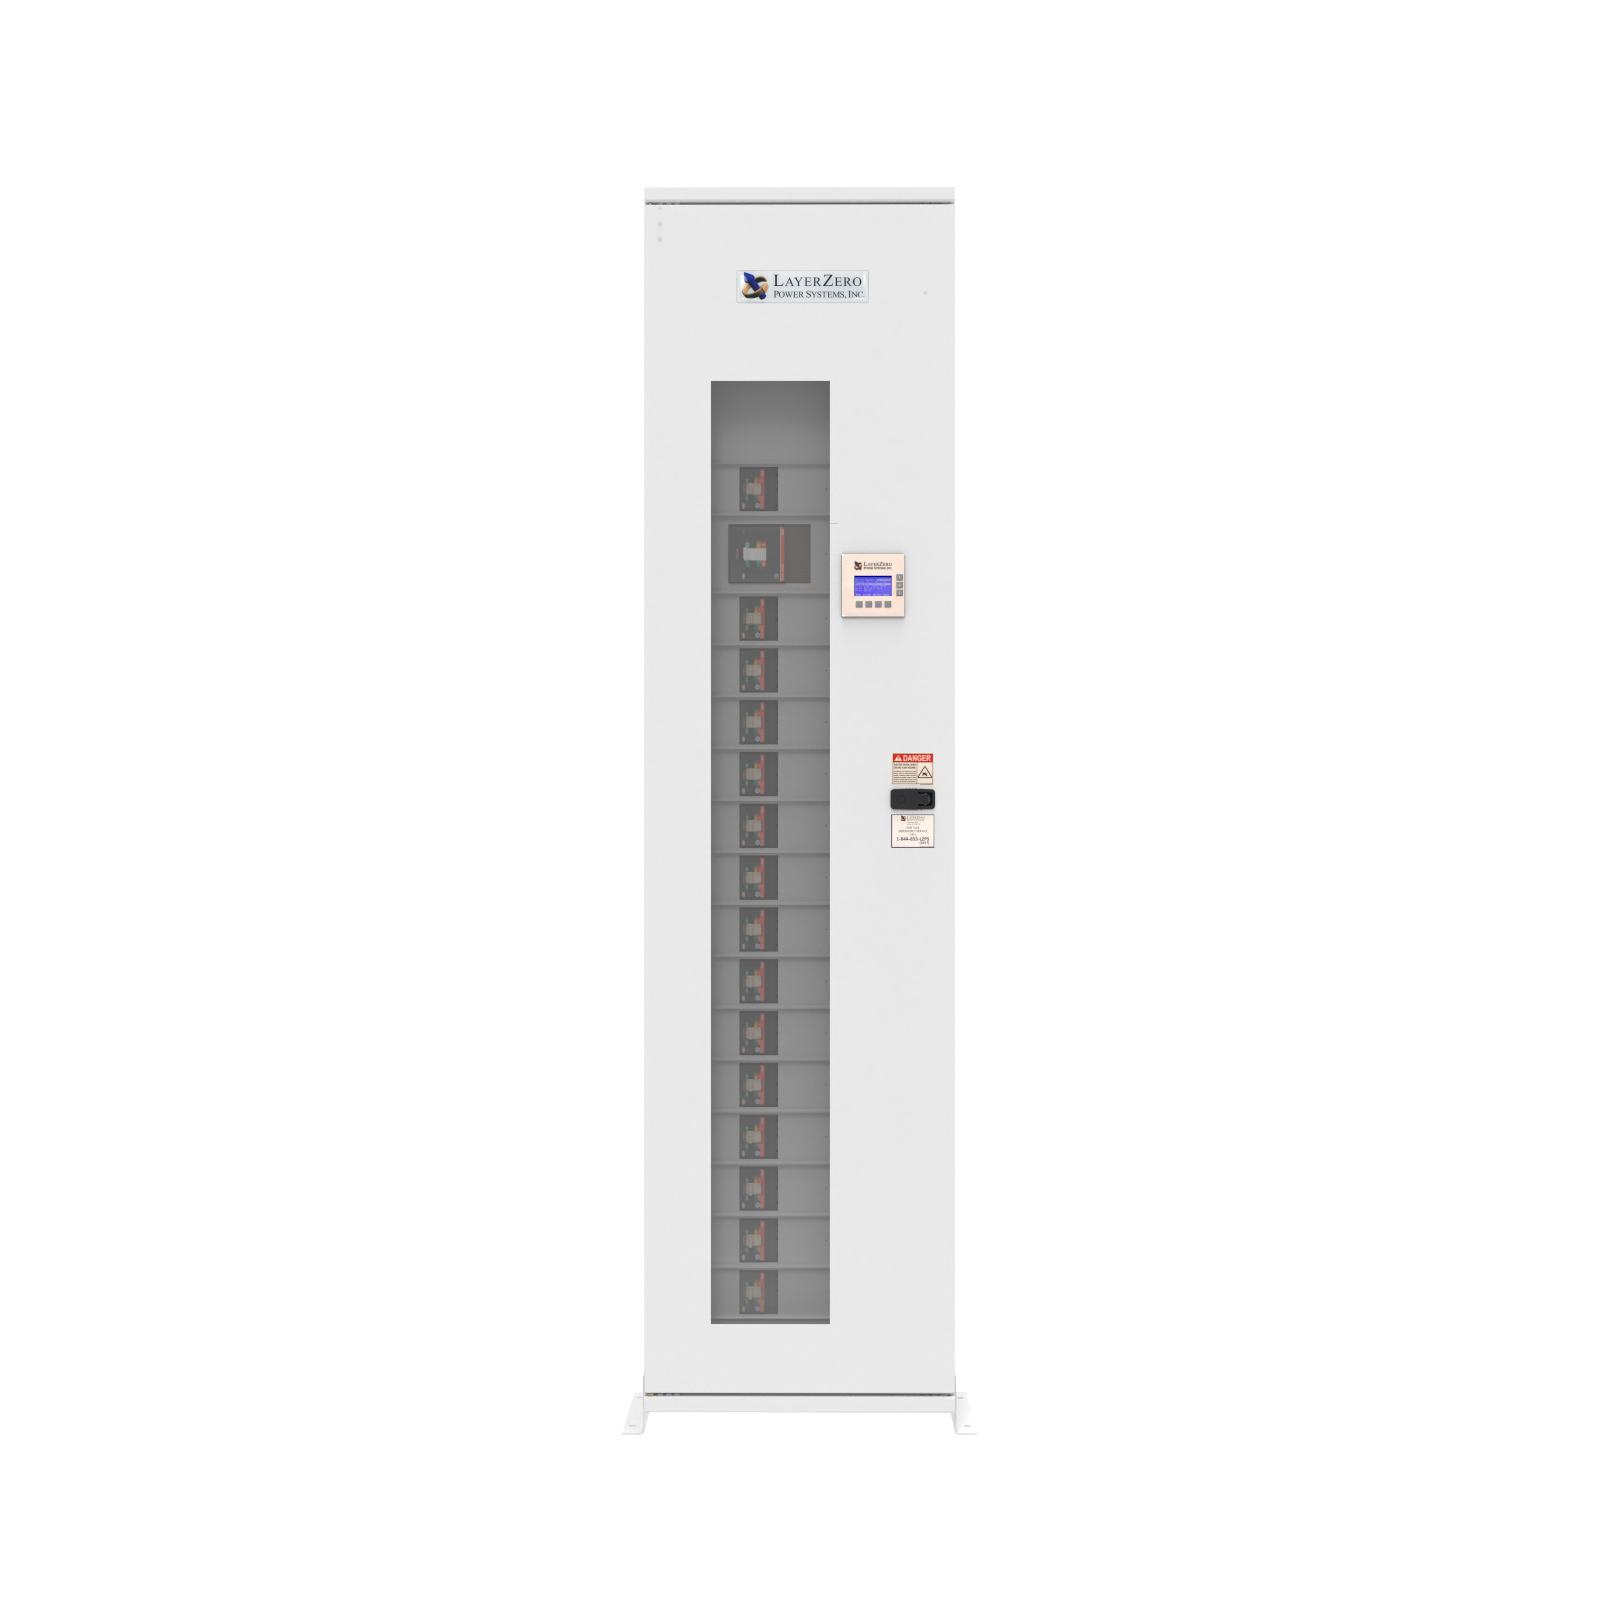 ePanel HD1 High-Density Mission-Critical Power Panel with 480V, 65KAIC, 1-800AF Main Breaker, Wall Mount, 1600A SafePanel